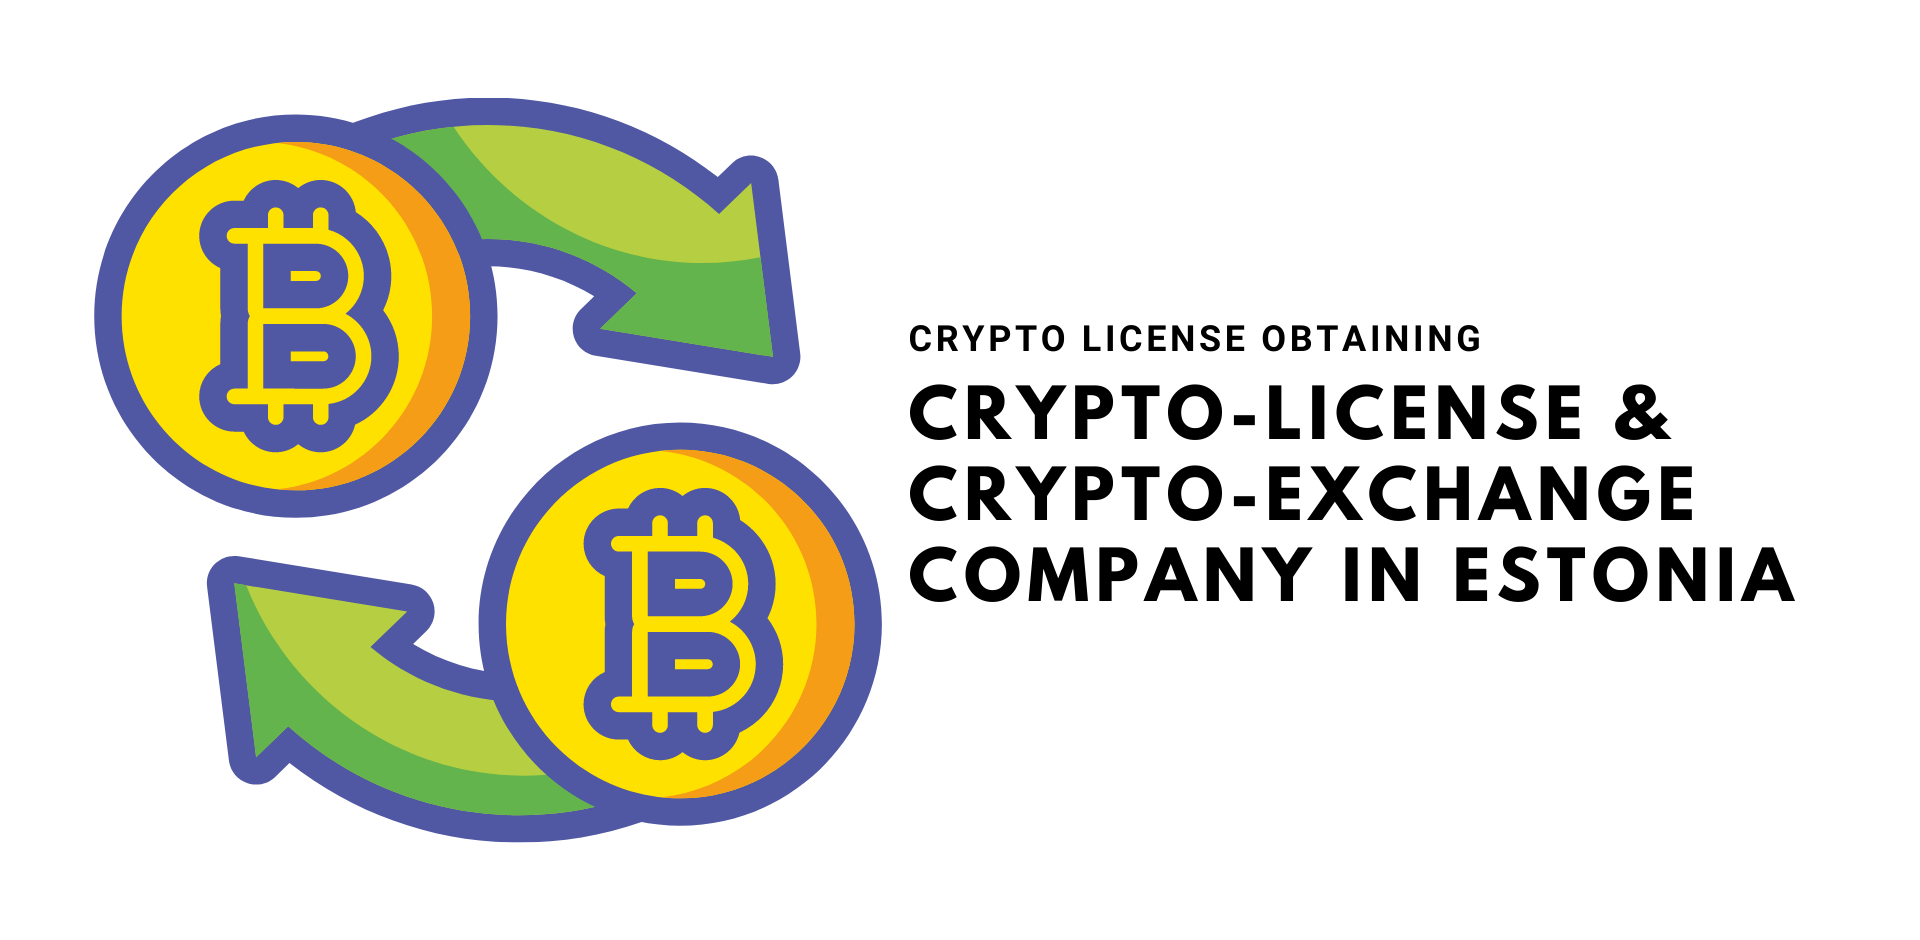 are crypto exchanges getting ats licensing